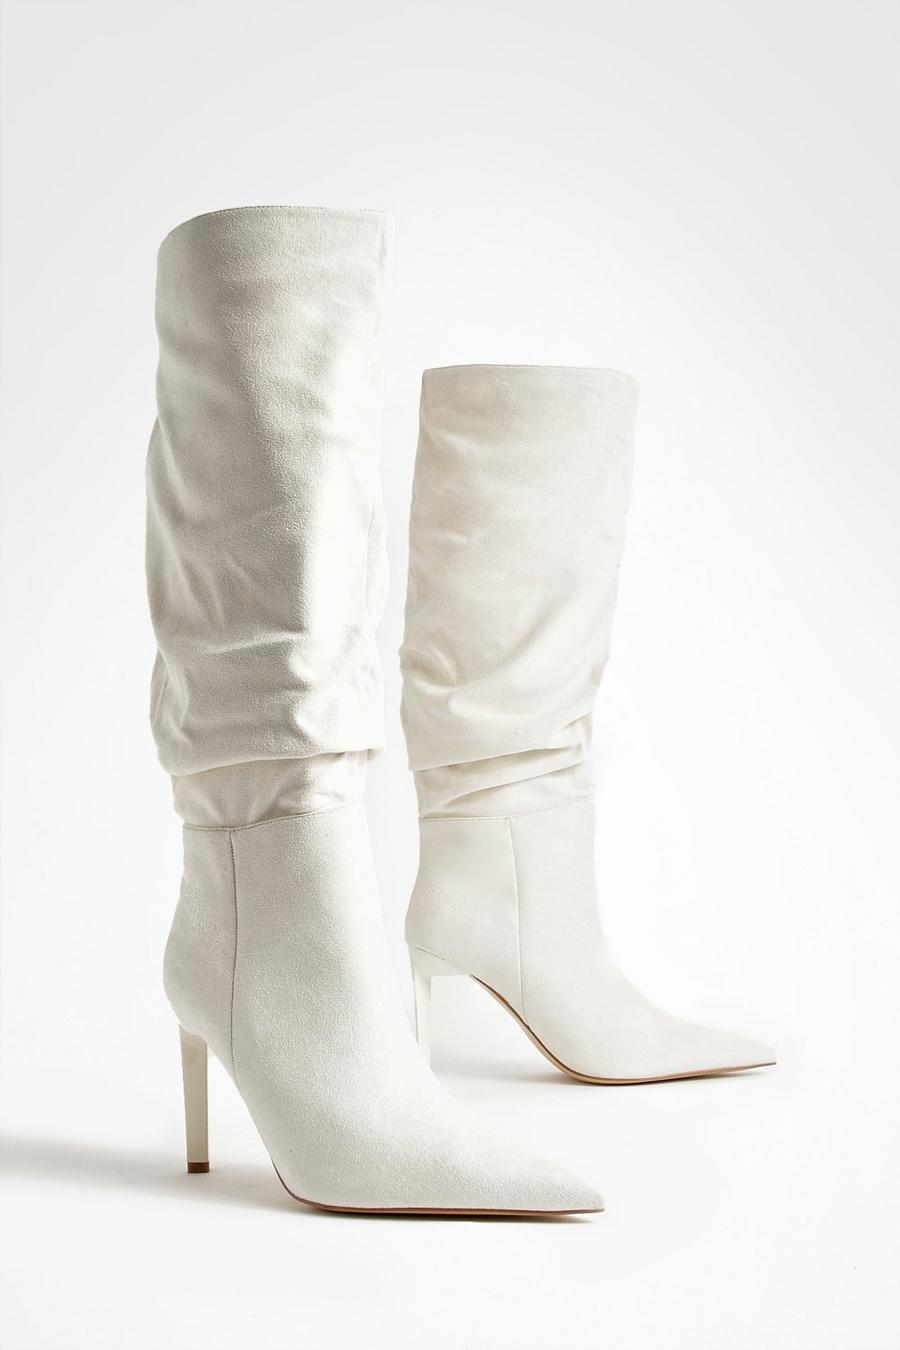 Cream Ruched Stiletto Pointed Toe Boots